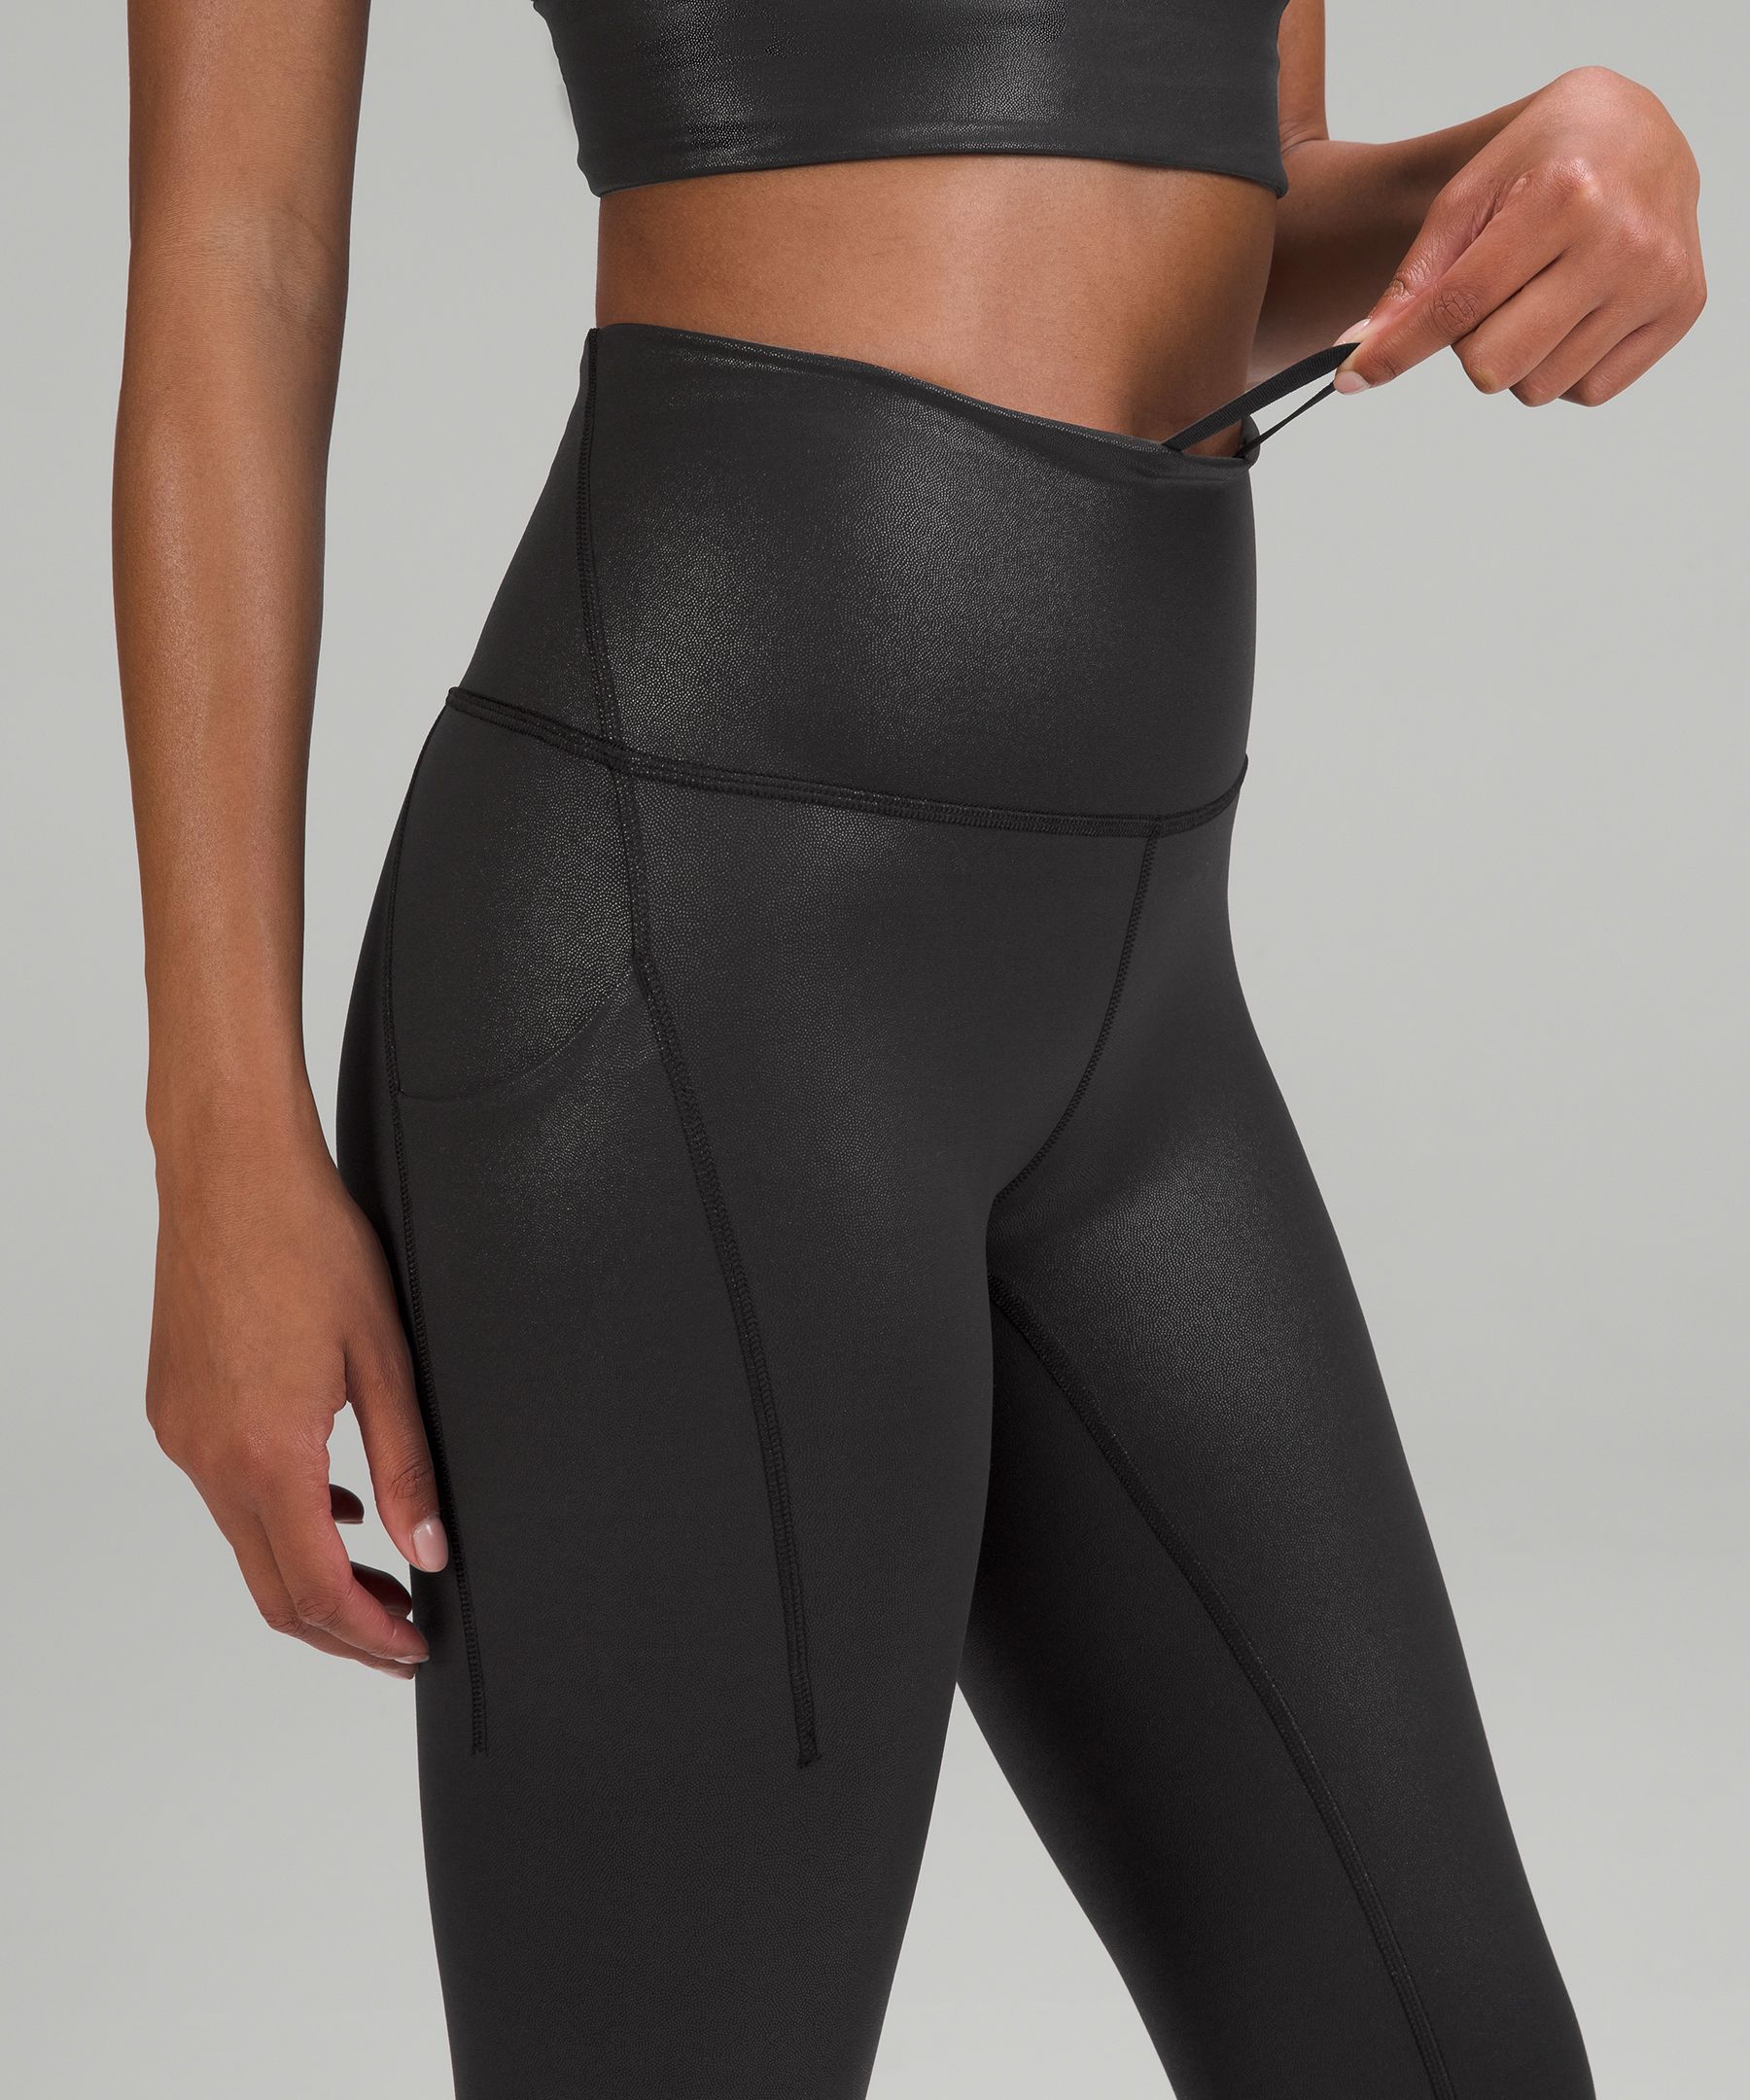 Lululemon Wunder Train High-Rise Tight with Pockets 25 - Black